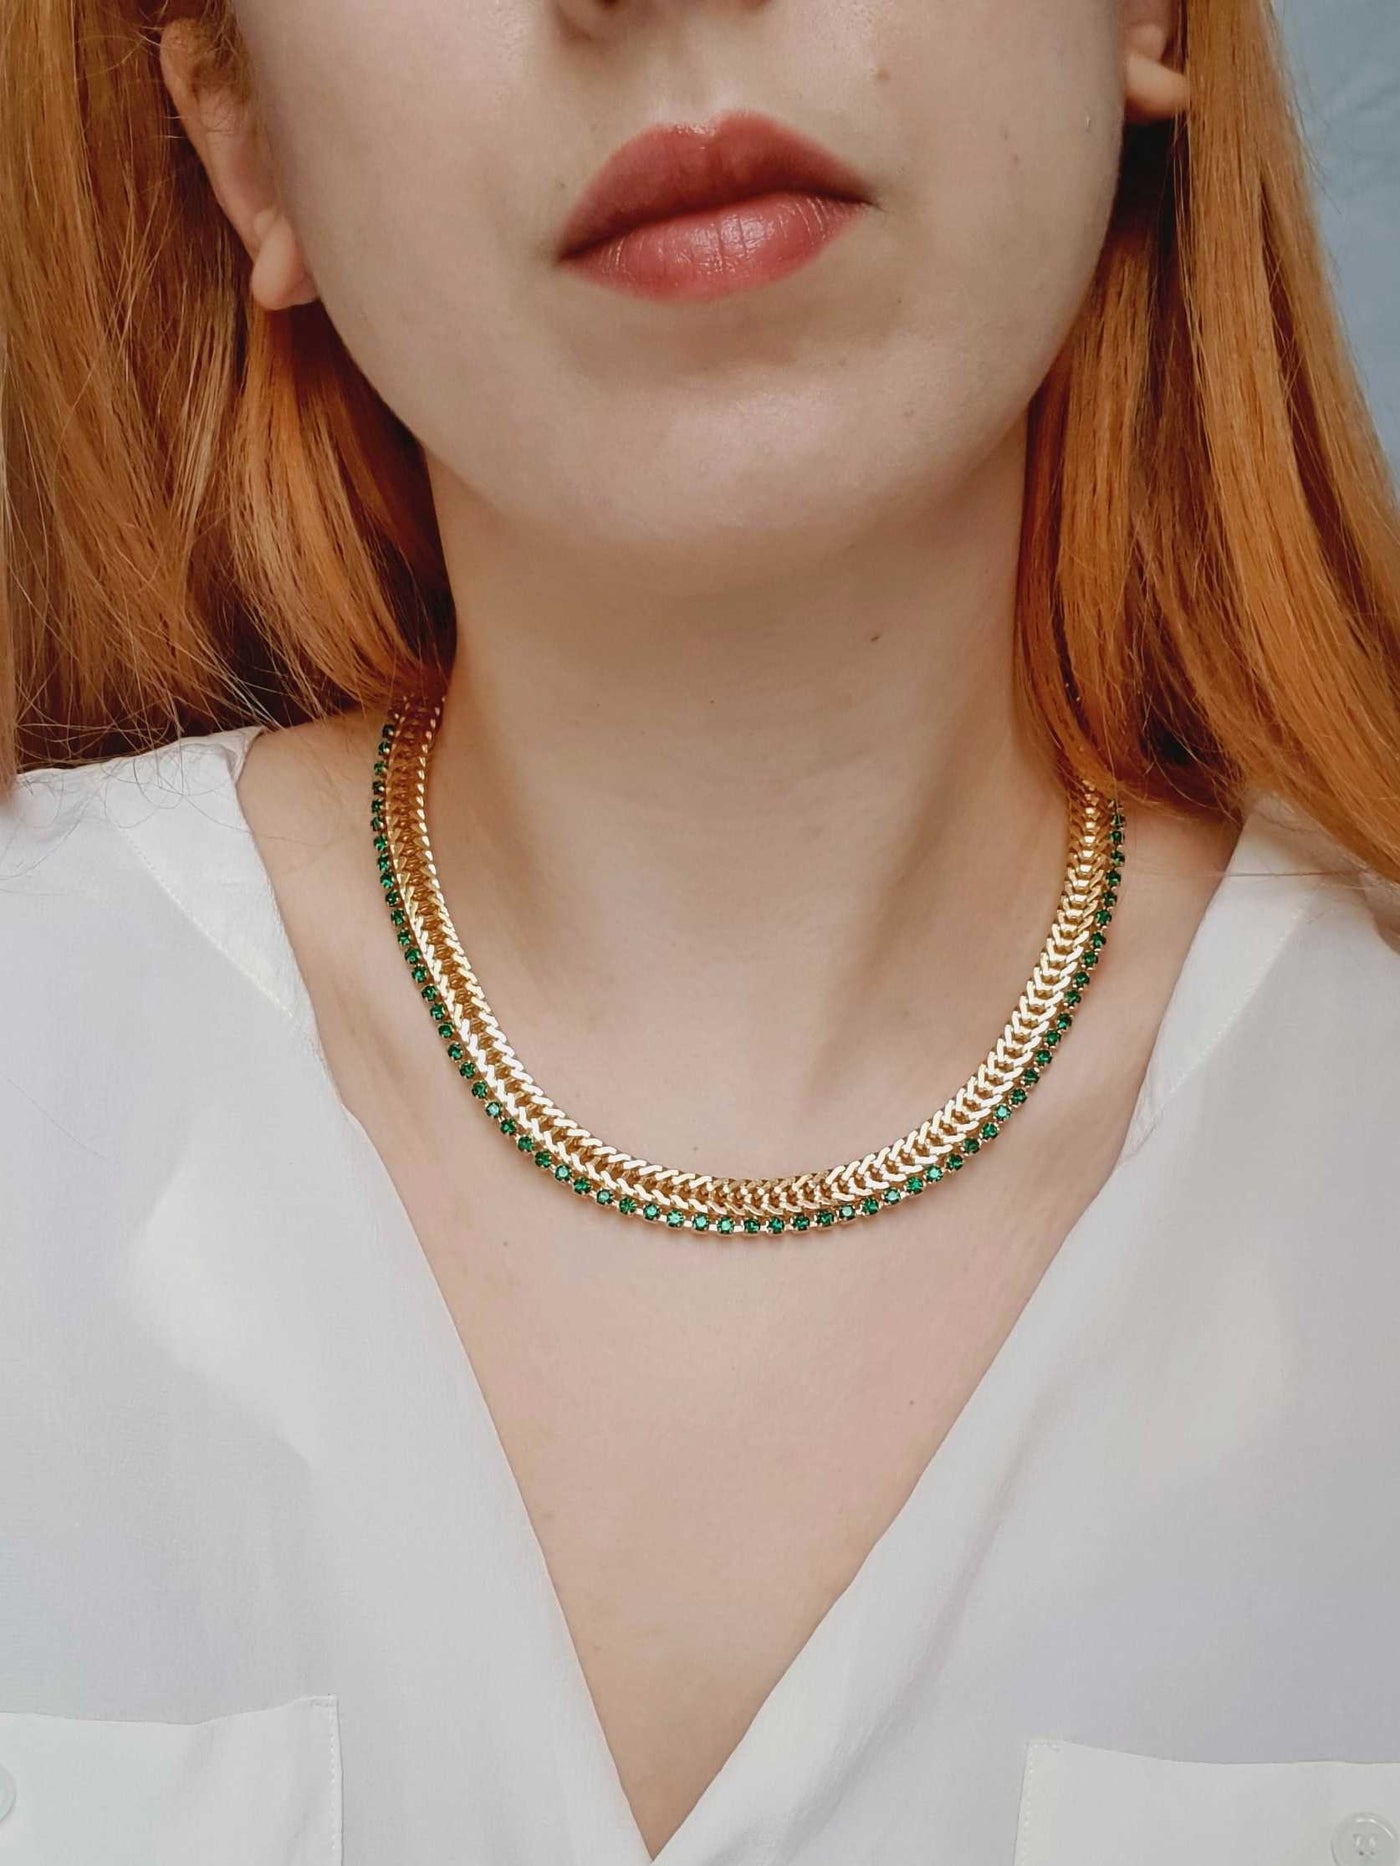 Vintage Gold Plated Herringbone Chain Necklace with Emerald Crystals